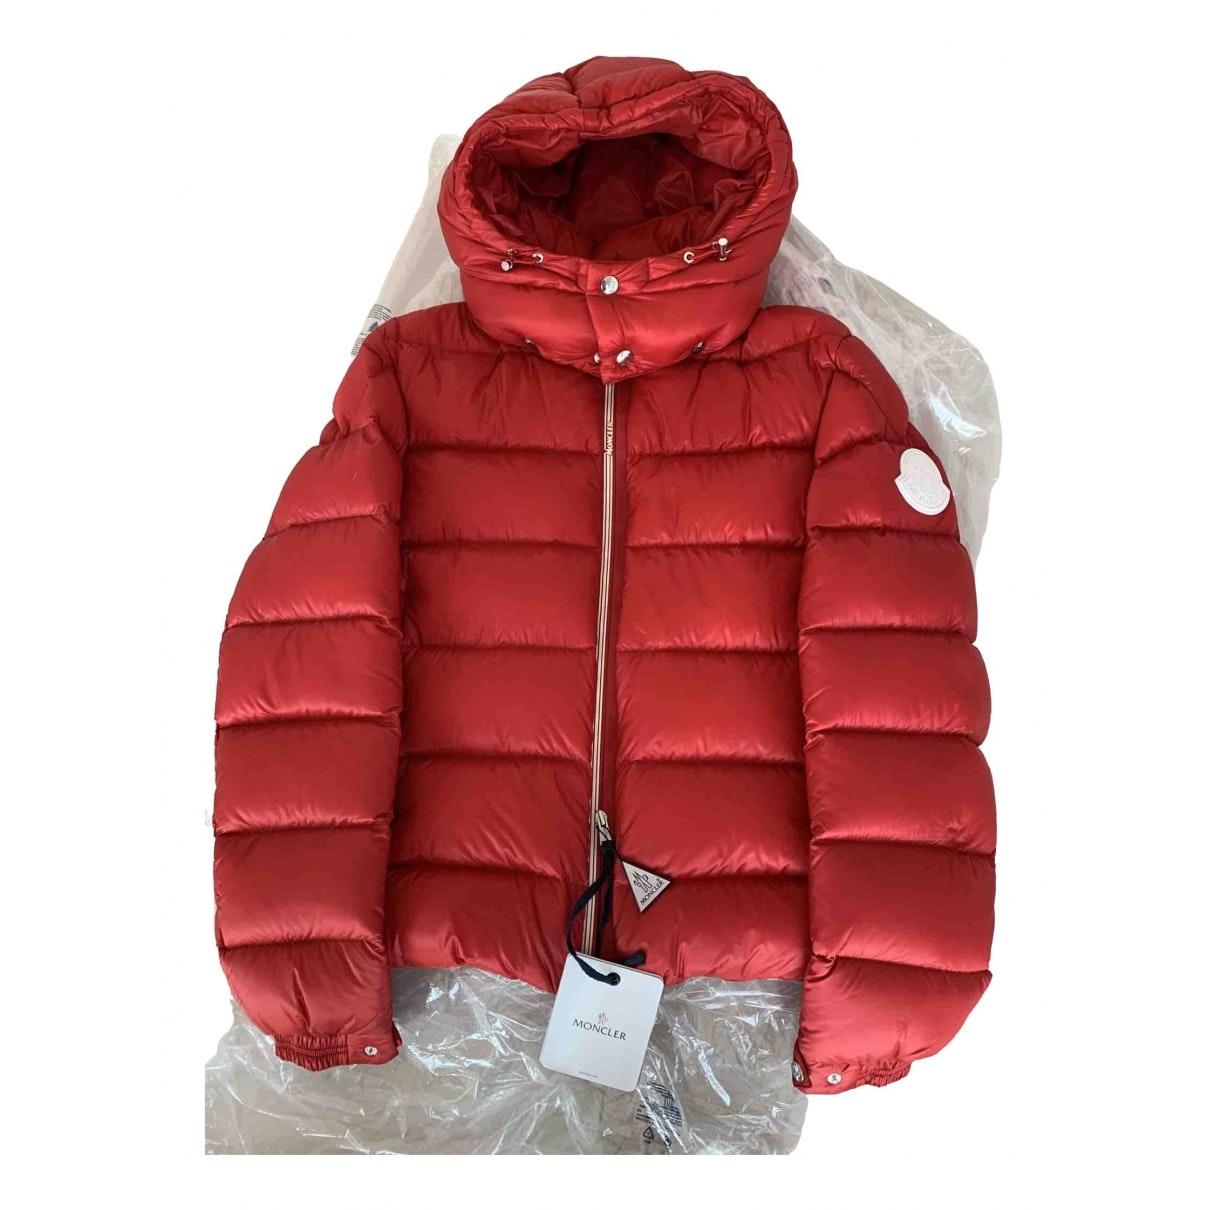 Moncler Synthetic Classic Puffer in Red for Men - Lyst